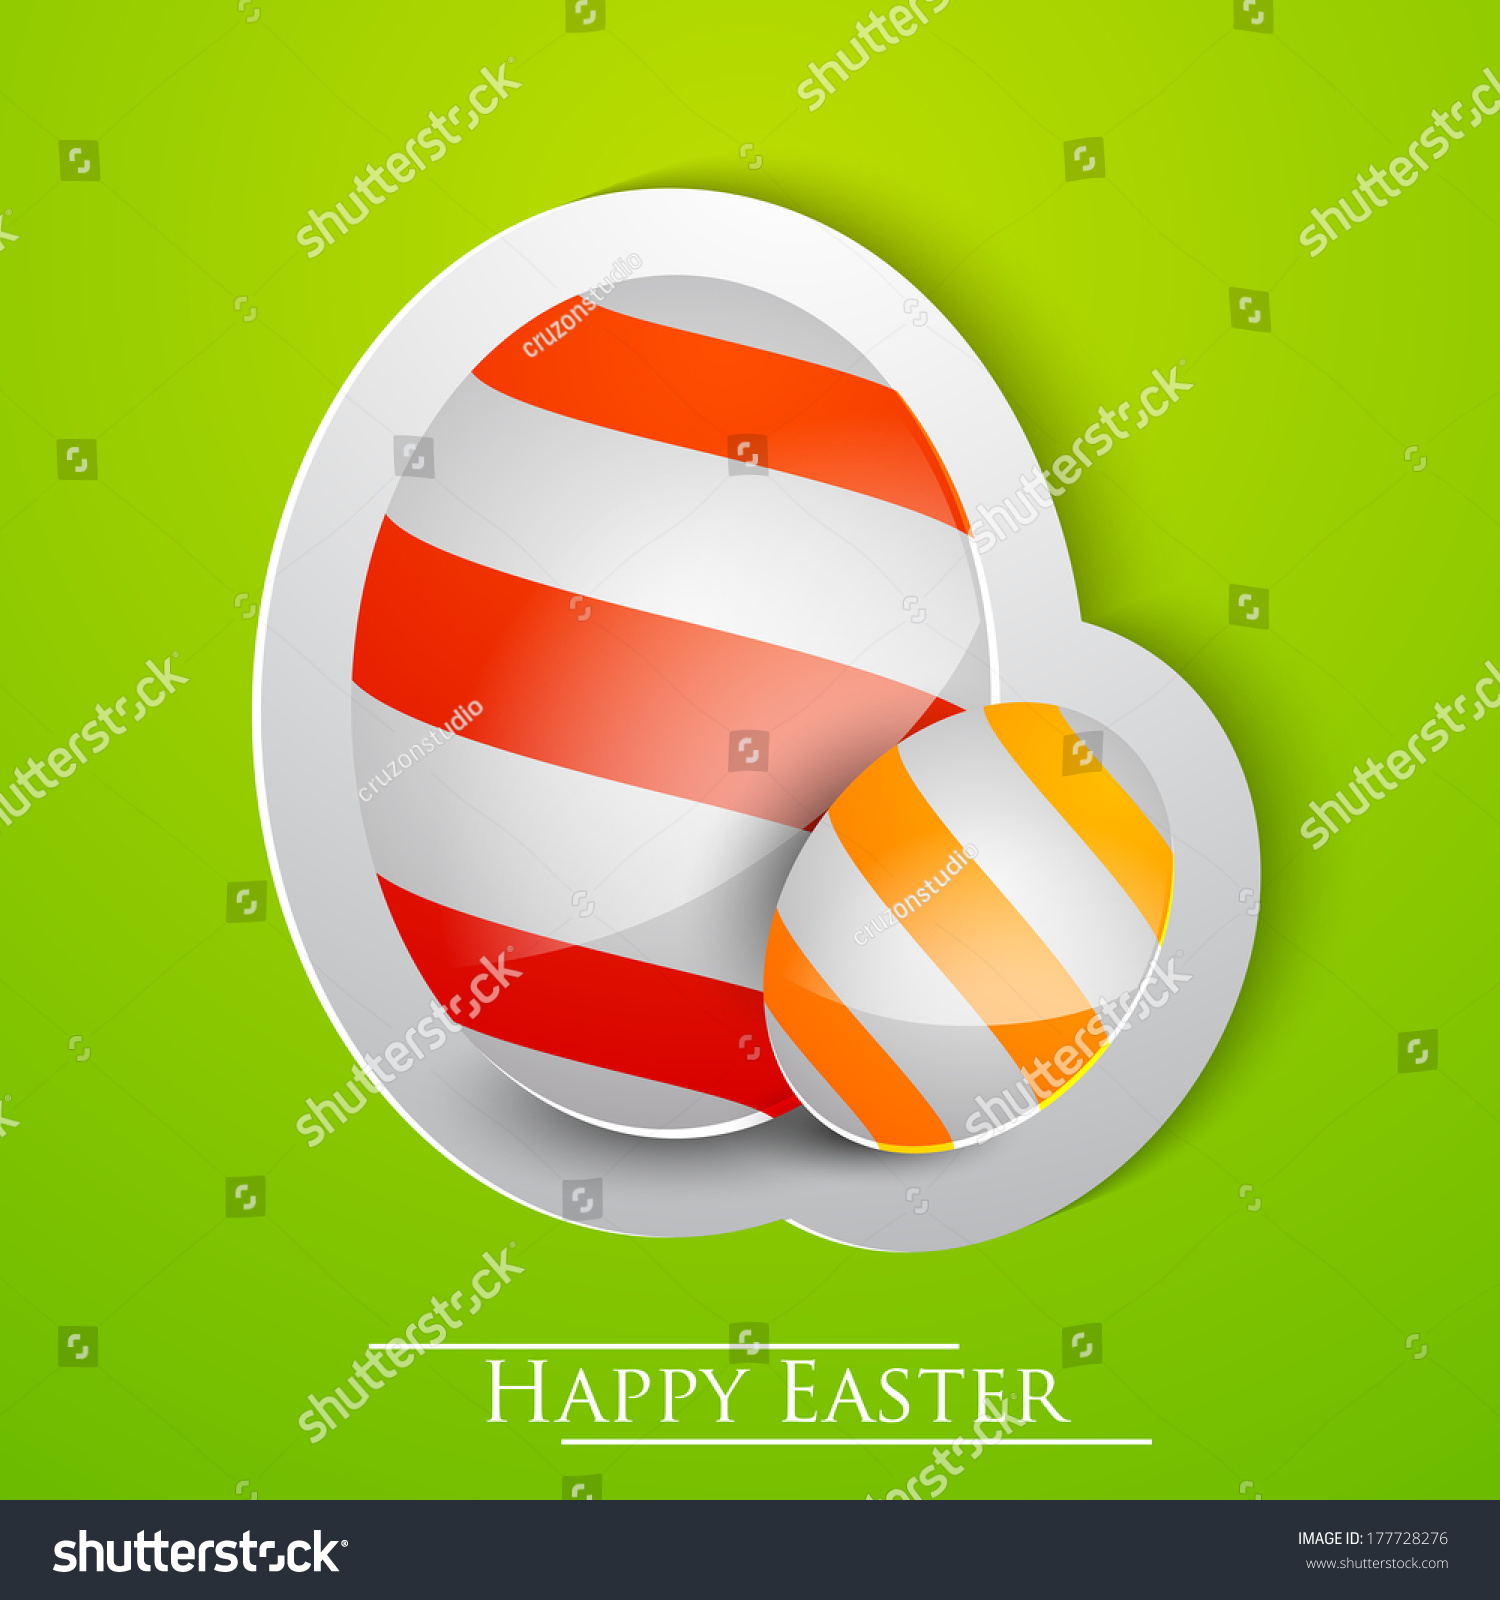 Easter eggs on green background. #177728276